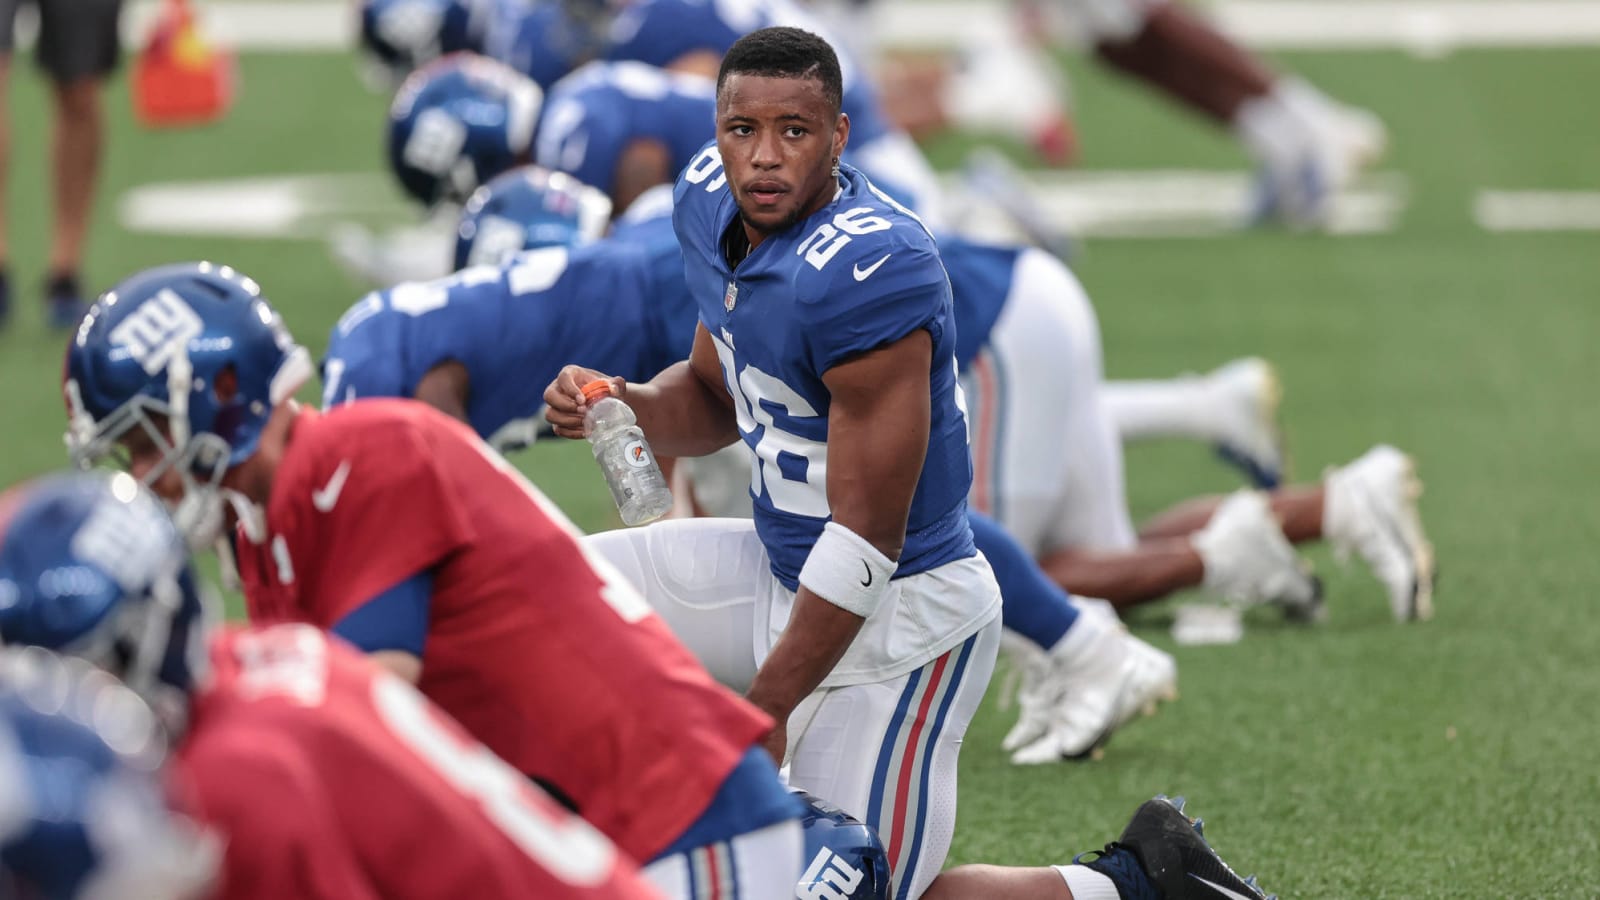 Giants RB Saquon Barkley on track to be ready for season